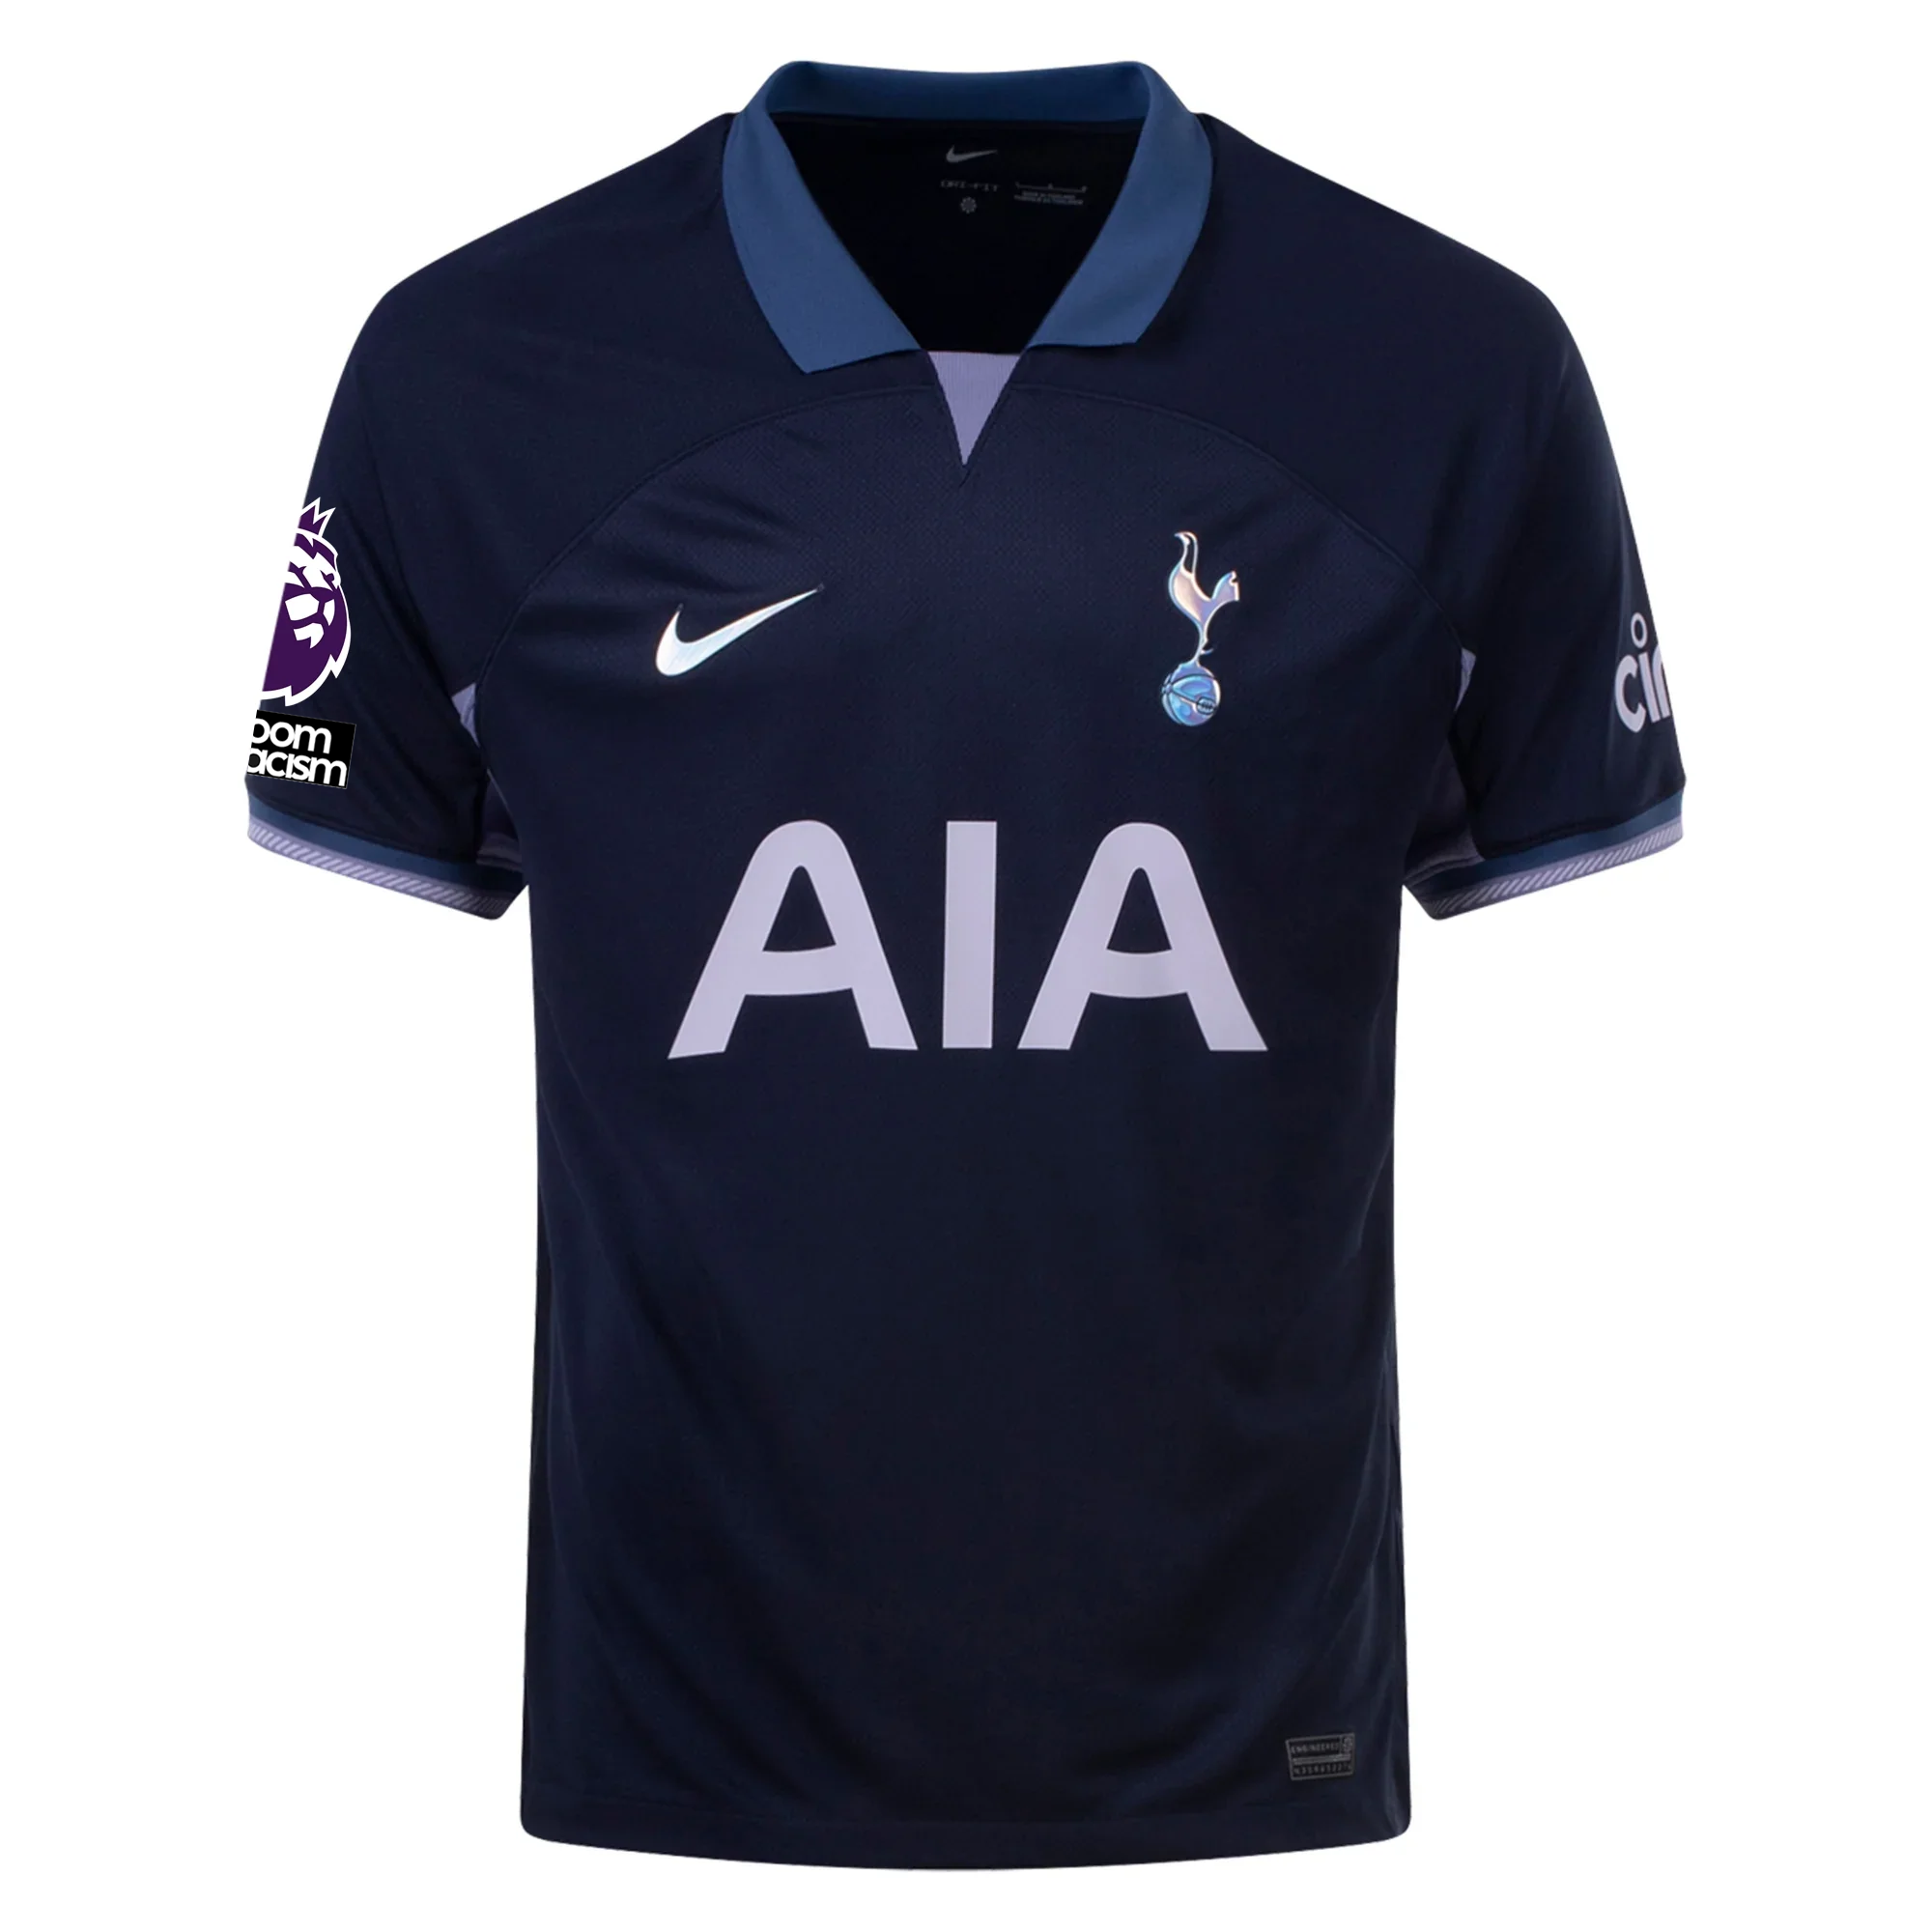 Here is How The New Nike Tottenham 17-18 Kit Could Look Like